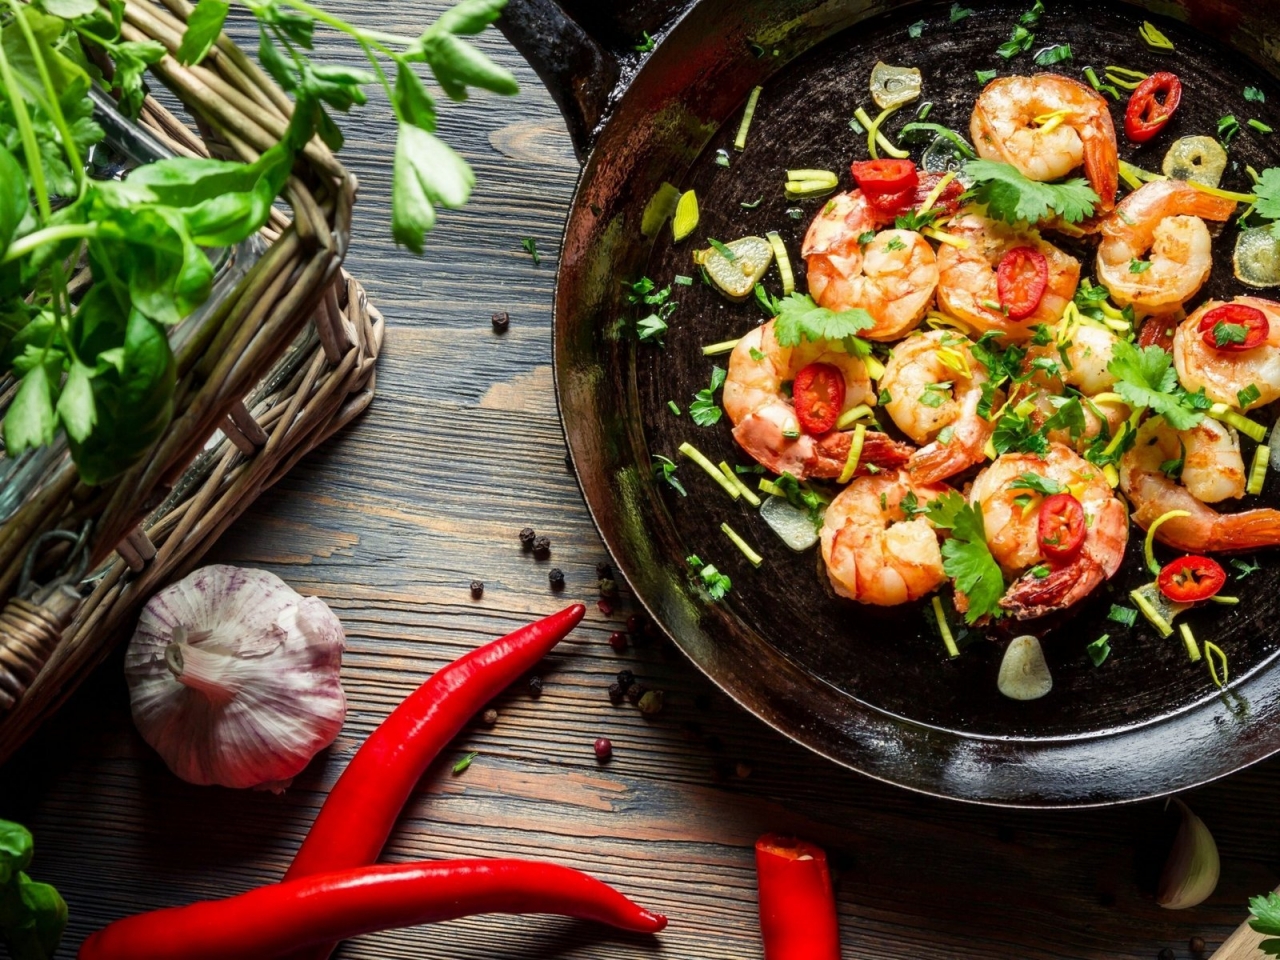 Shrimp with Pepper Chili Garlic Herbs for 1280 x 960 resolution